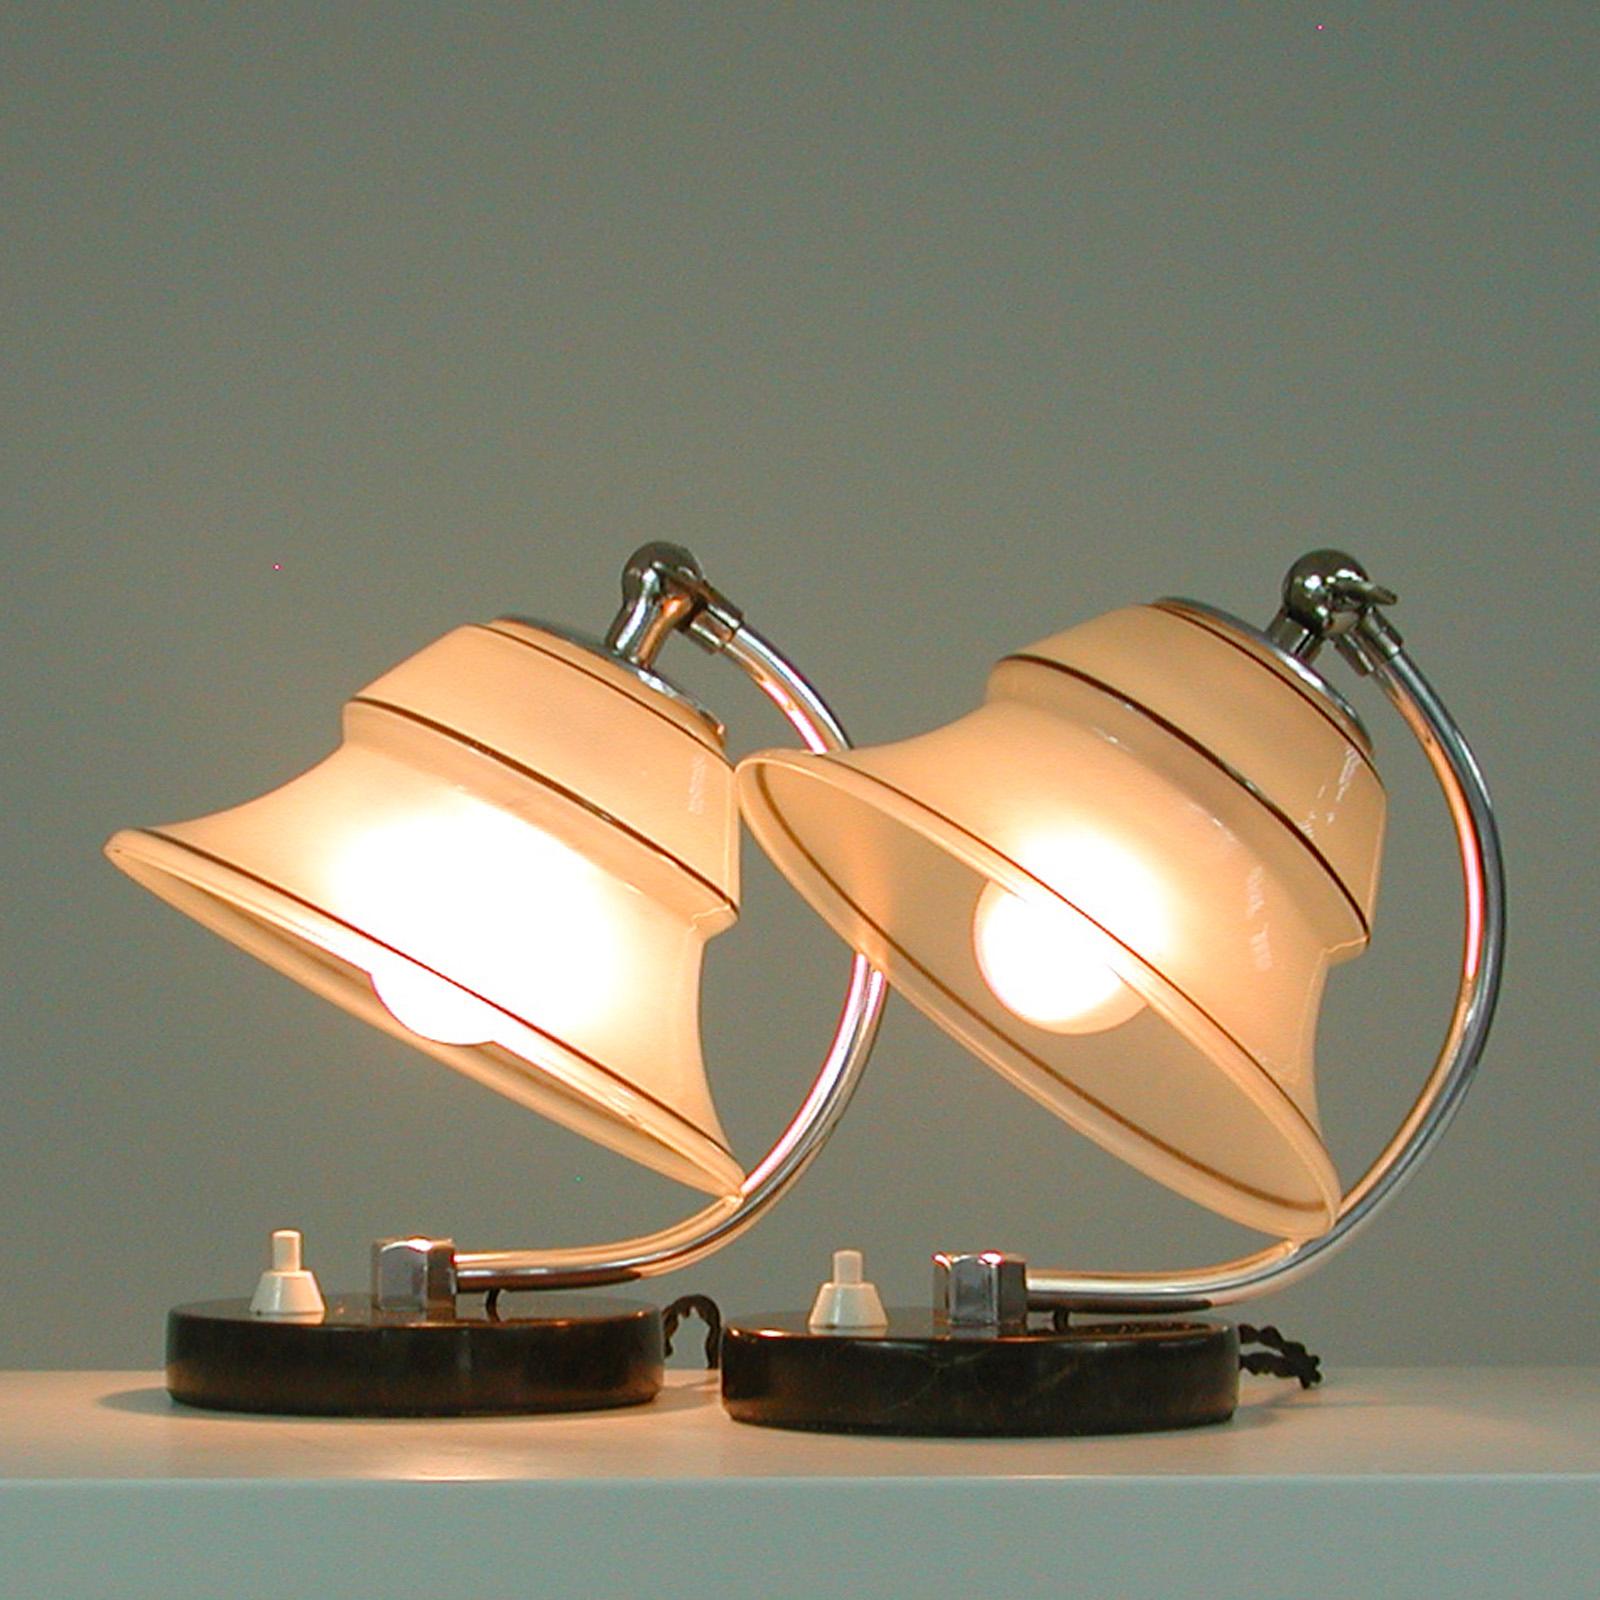 German Art Deco Enameled Satin Glass, Marble and Aluminum Table Lamps, 1930s For Sale 1